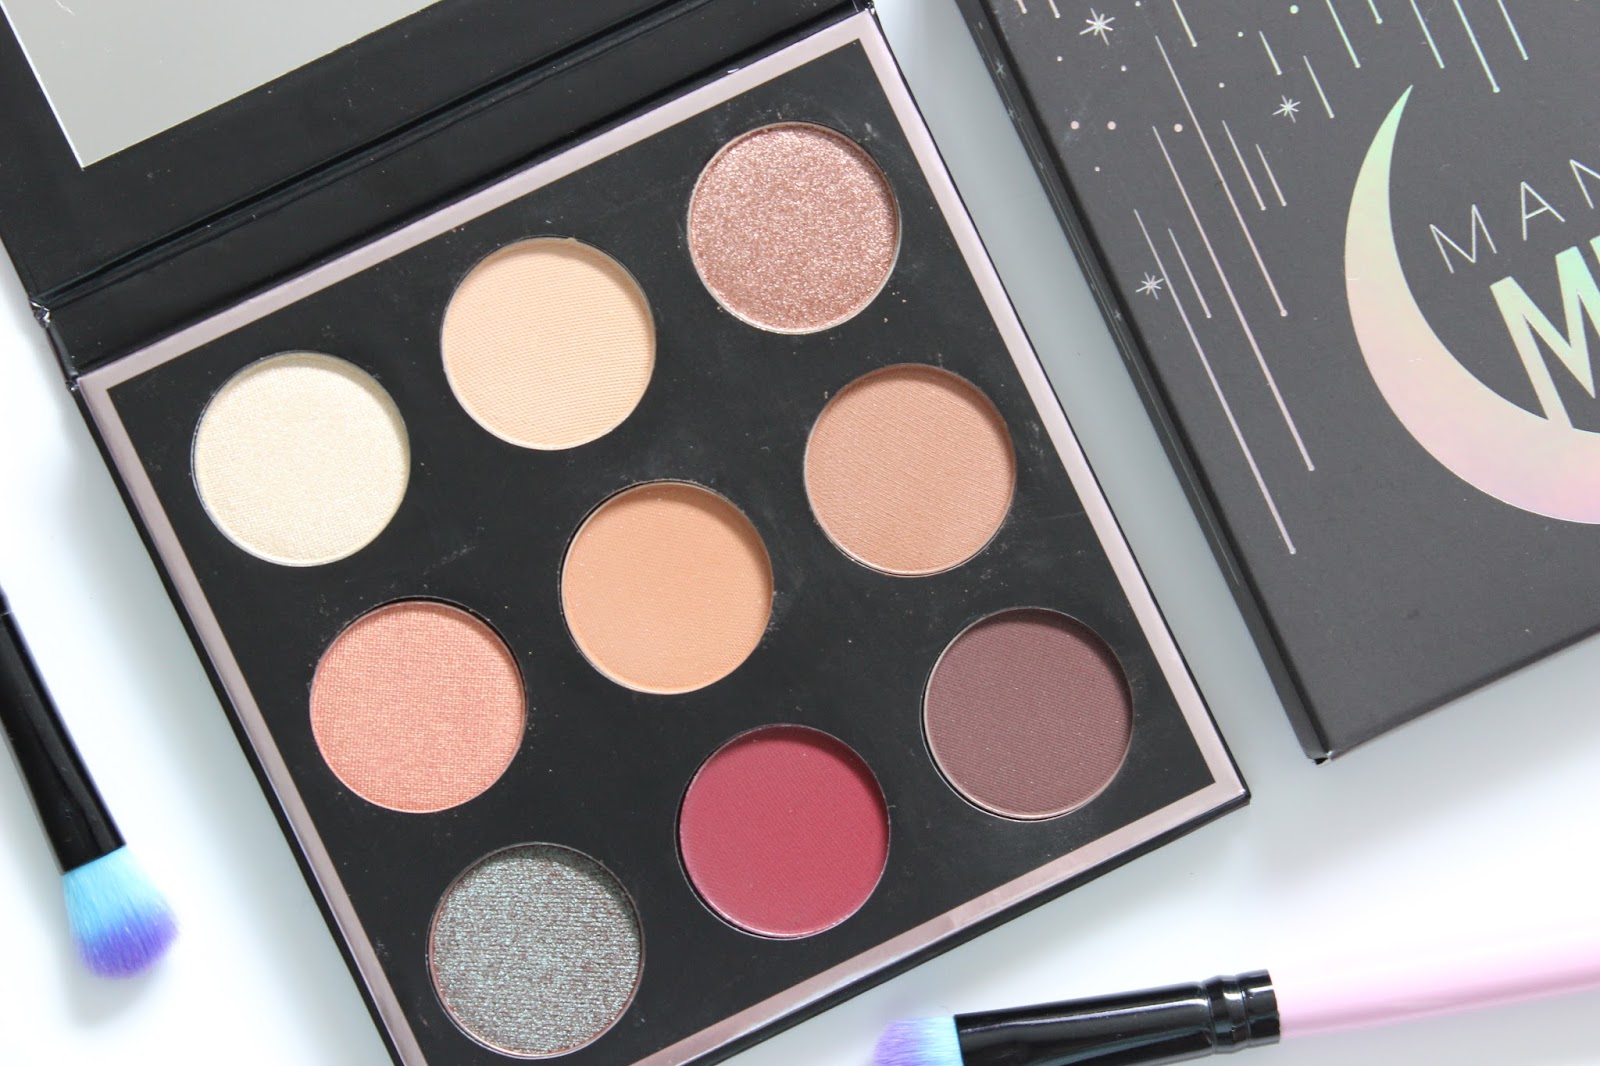 x Makeup Geek Palette | Review & Swatches | BEAUTY ADDICT